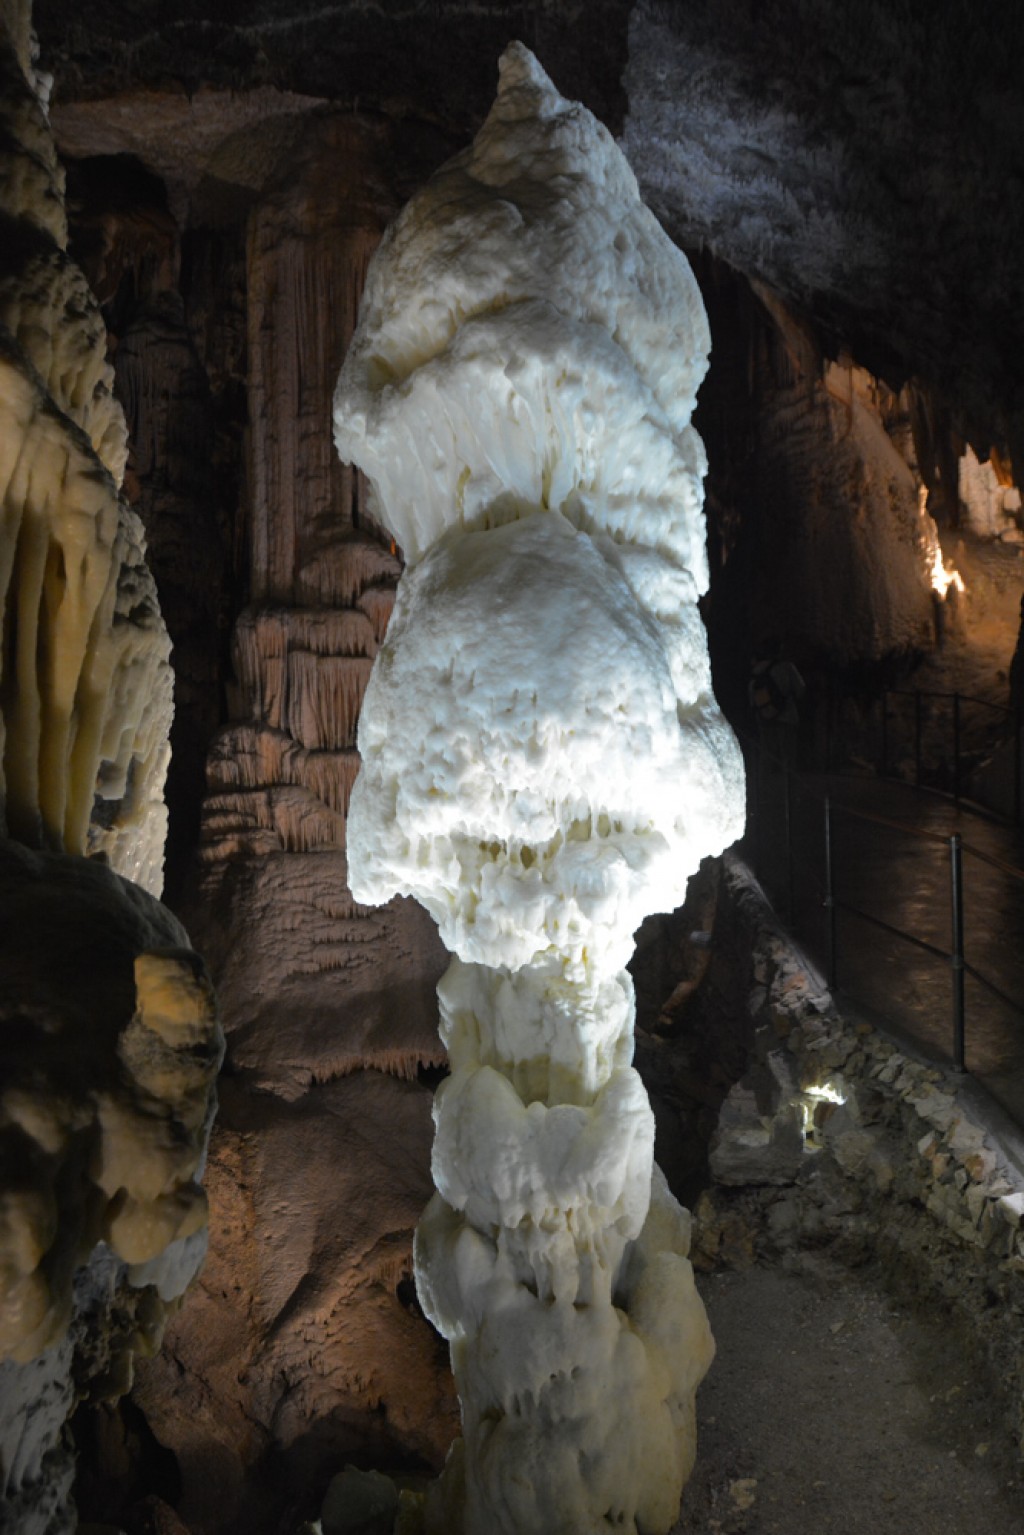 Brilliant, the symbol of the caves.